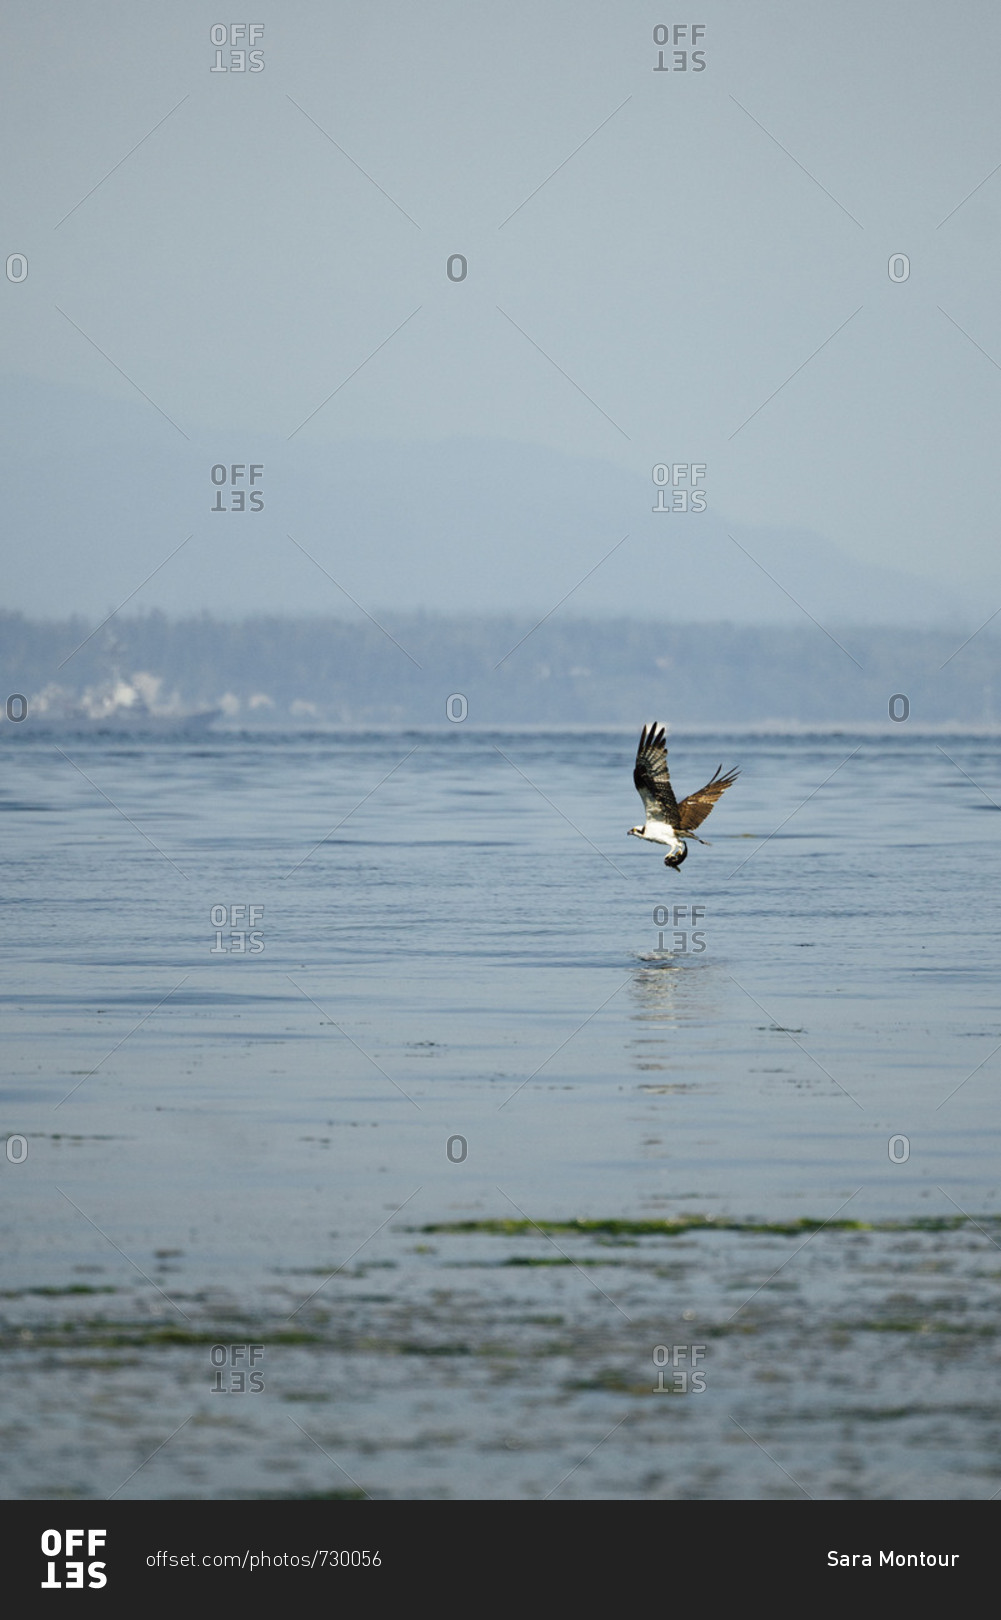 Osprey holding a fish in its talons flying above the waters of Puget Sound